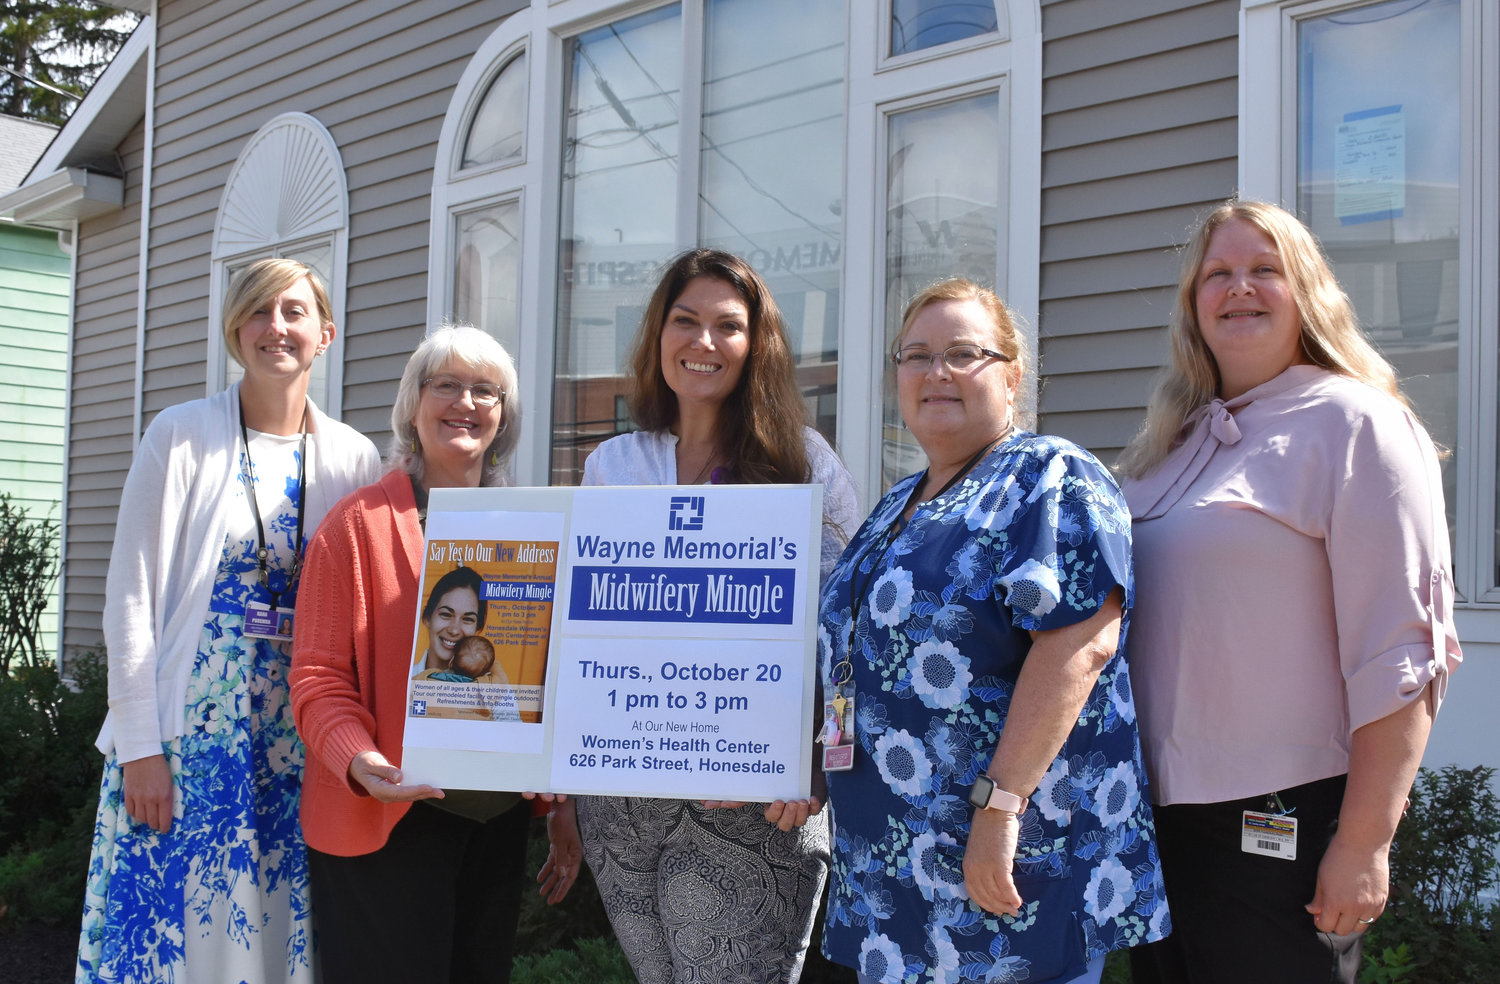 The certified nurse midwives of the Women’s Health Center and Wayne Memorial Hospital’s New Beginning birthing suites will sponsor the Midwifery Mingle on Thursday, October 20. Pictured are Kara Poremba, left; Patricia Konzman; Christina MacDowell; Mary Beth Dastalfo, RN; and Heather Kellam.